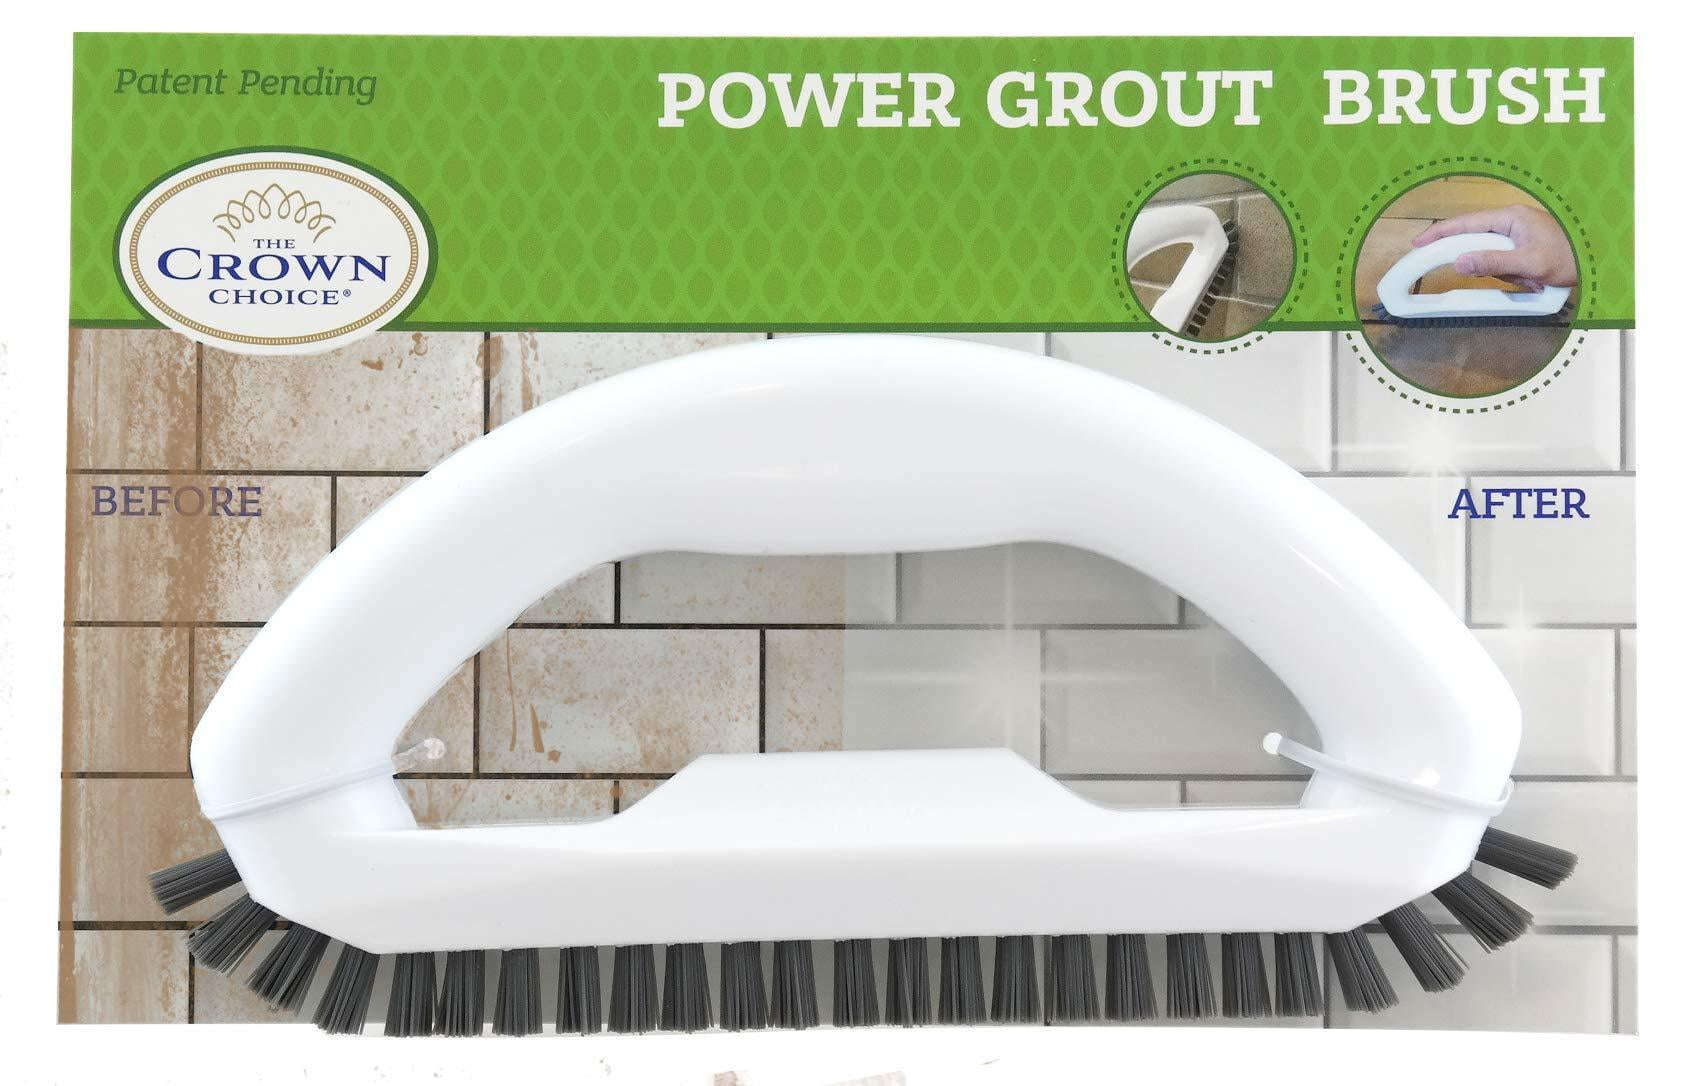  kHelfer Electric Cleaning Brush, KH6A Electric Grout Brush  Waterproof, 11″ Small Cordless Power Scrubber with 5 Replacement Brushes  for Grout, Tile Crevice, Corners, Bathtub, Kitchen Bathroom : Tools & Home  Improvement